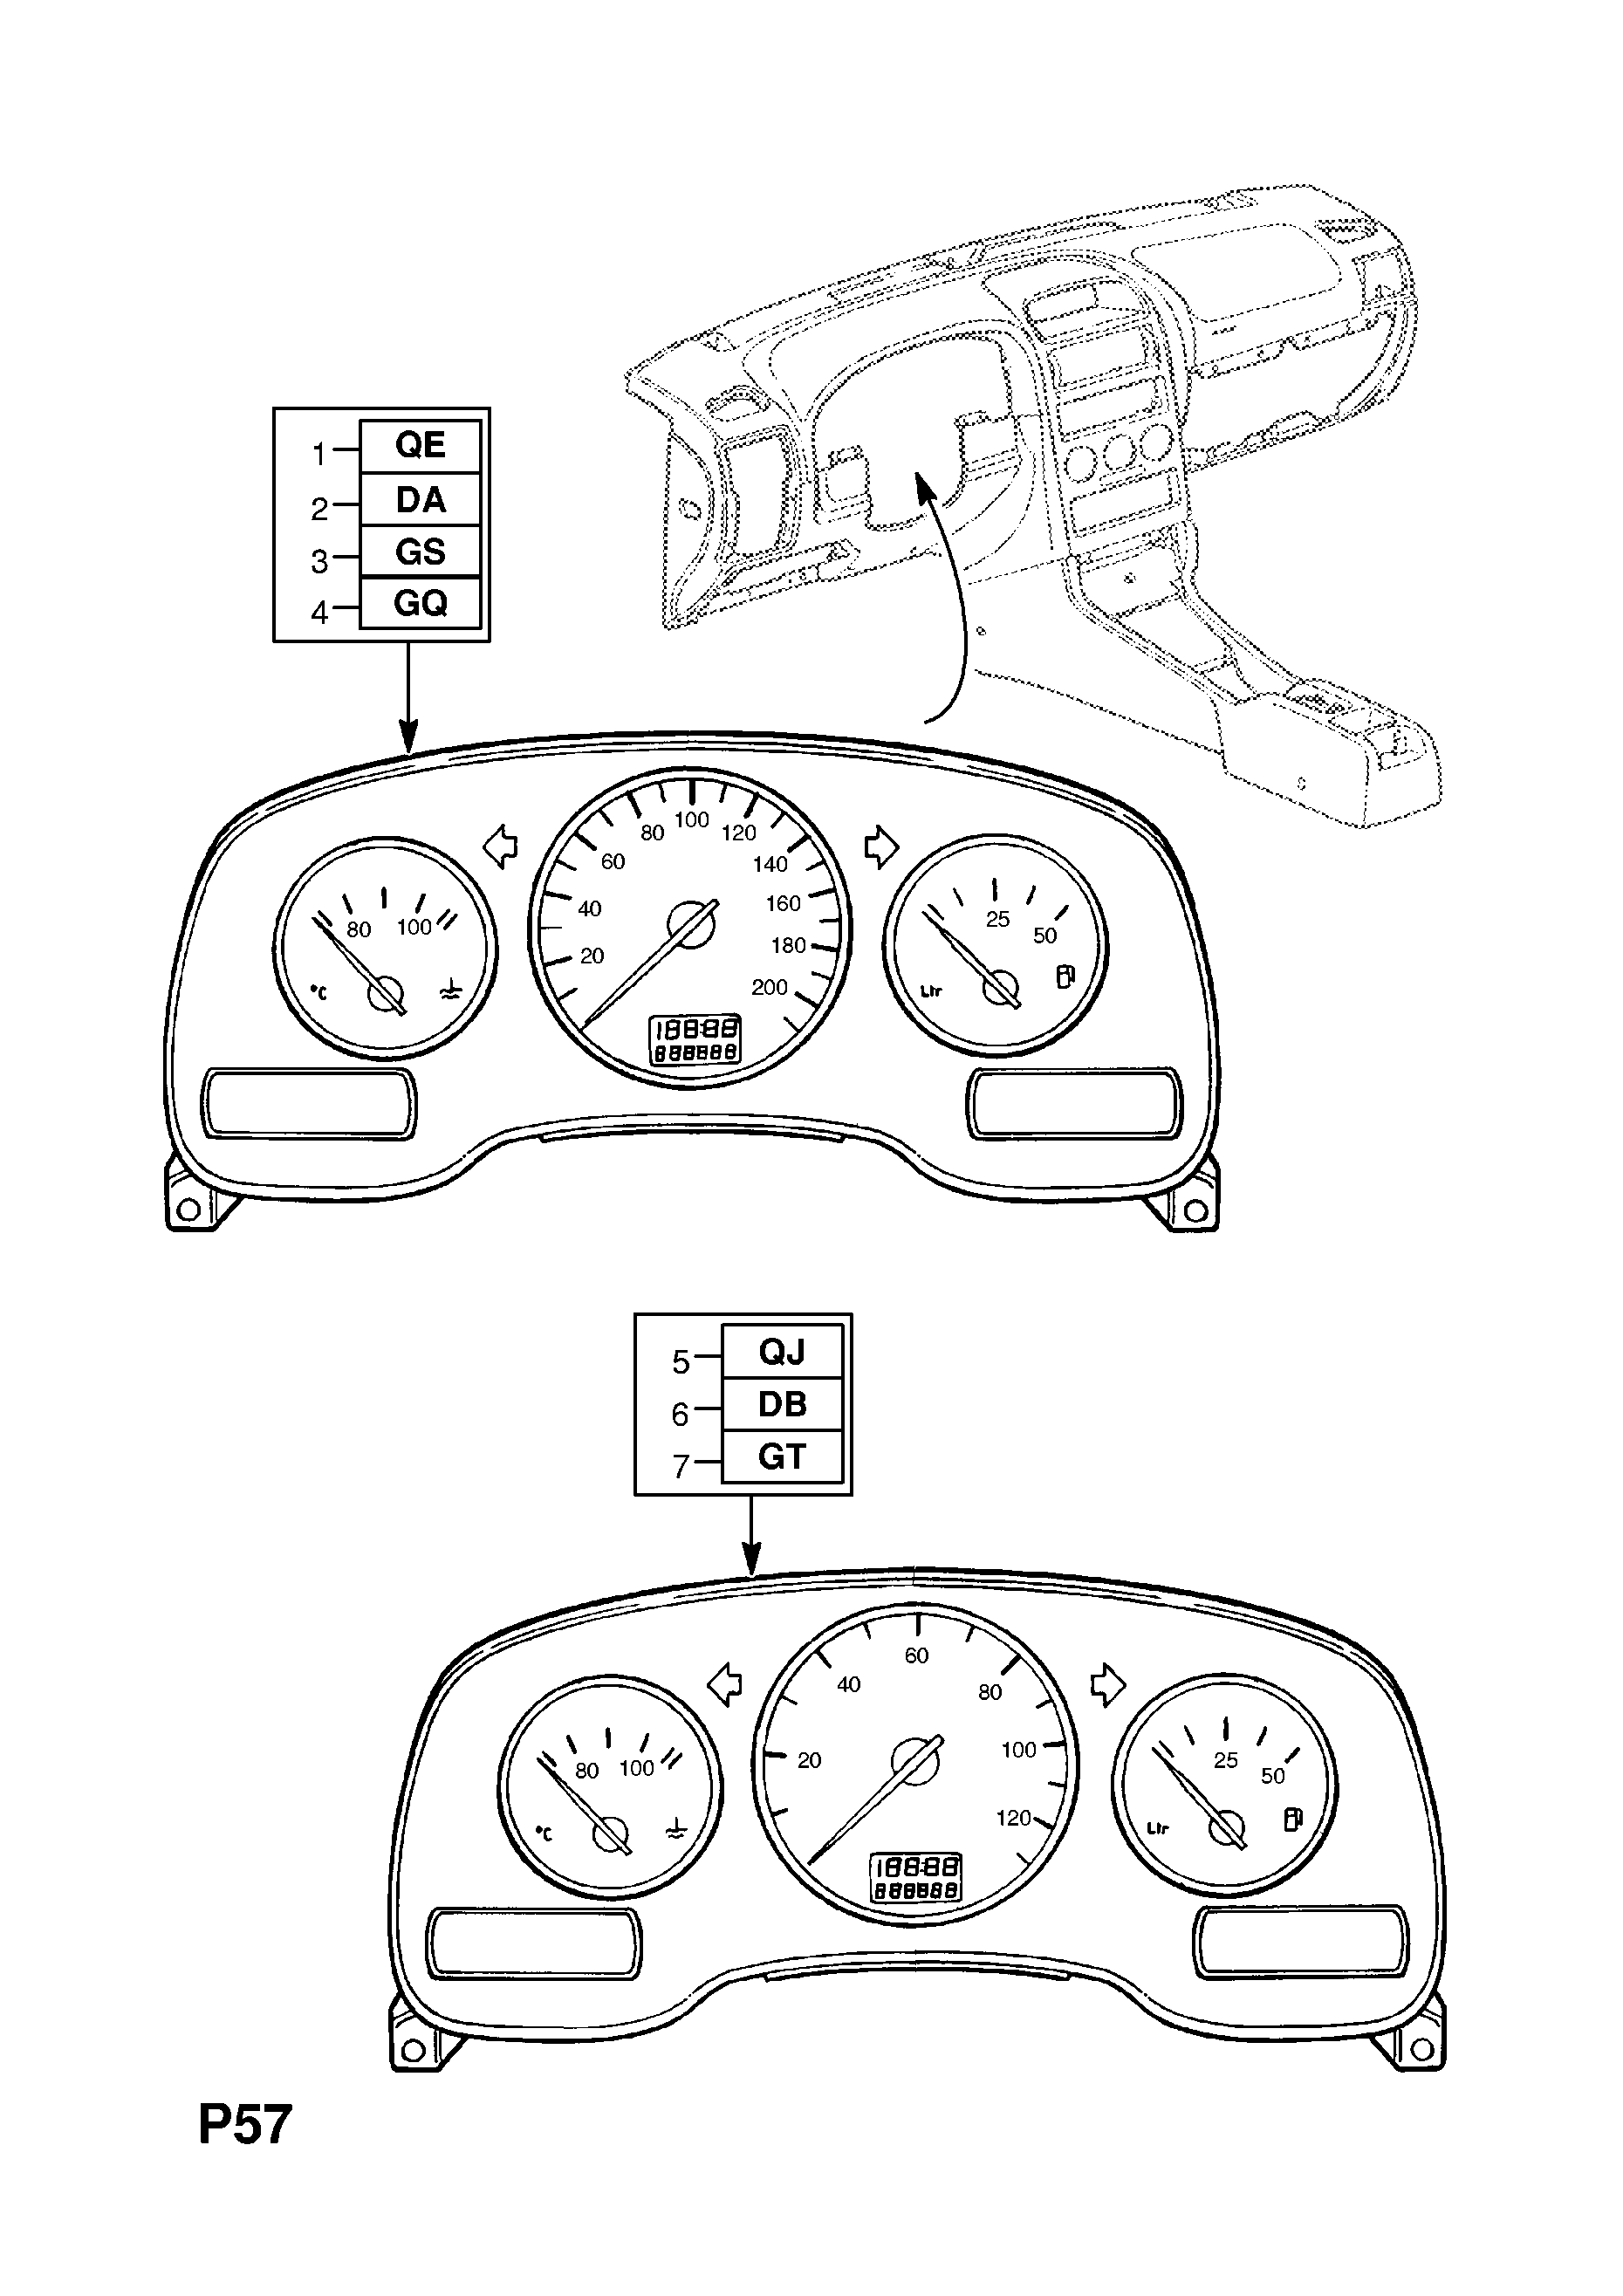 INSTRUMENTS (EXCHANGE) (CONTD.) <small><i>[HATCH,SALOON,ESTATE,VAN (F08,F35,F48,F69,F70) (USED WITH AUTOMATIC TRANSMISSION) (NOT USED WHEN TACHOMETER FITTED) (EXCEPT VAUXHALL)]</i></small>